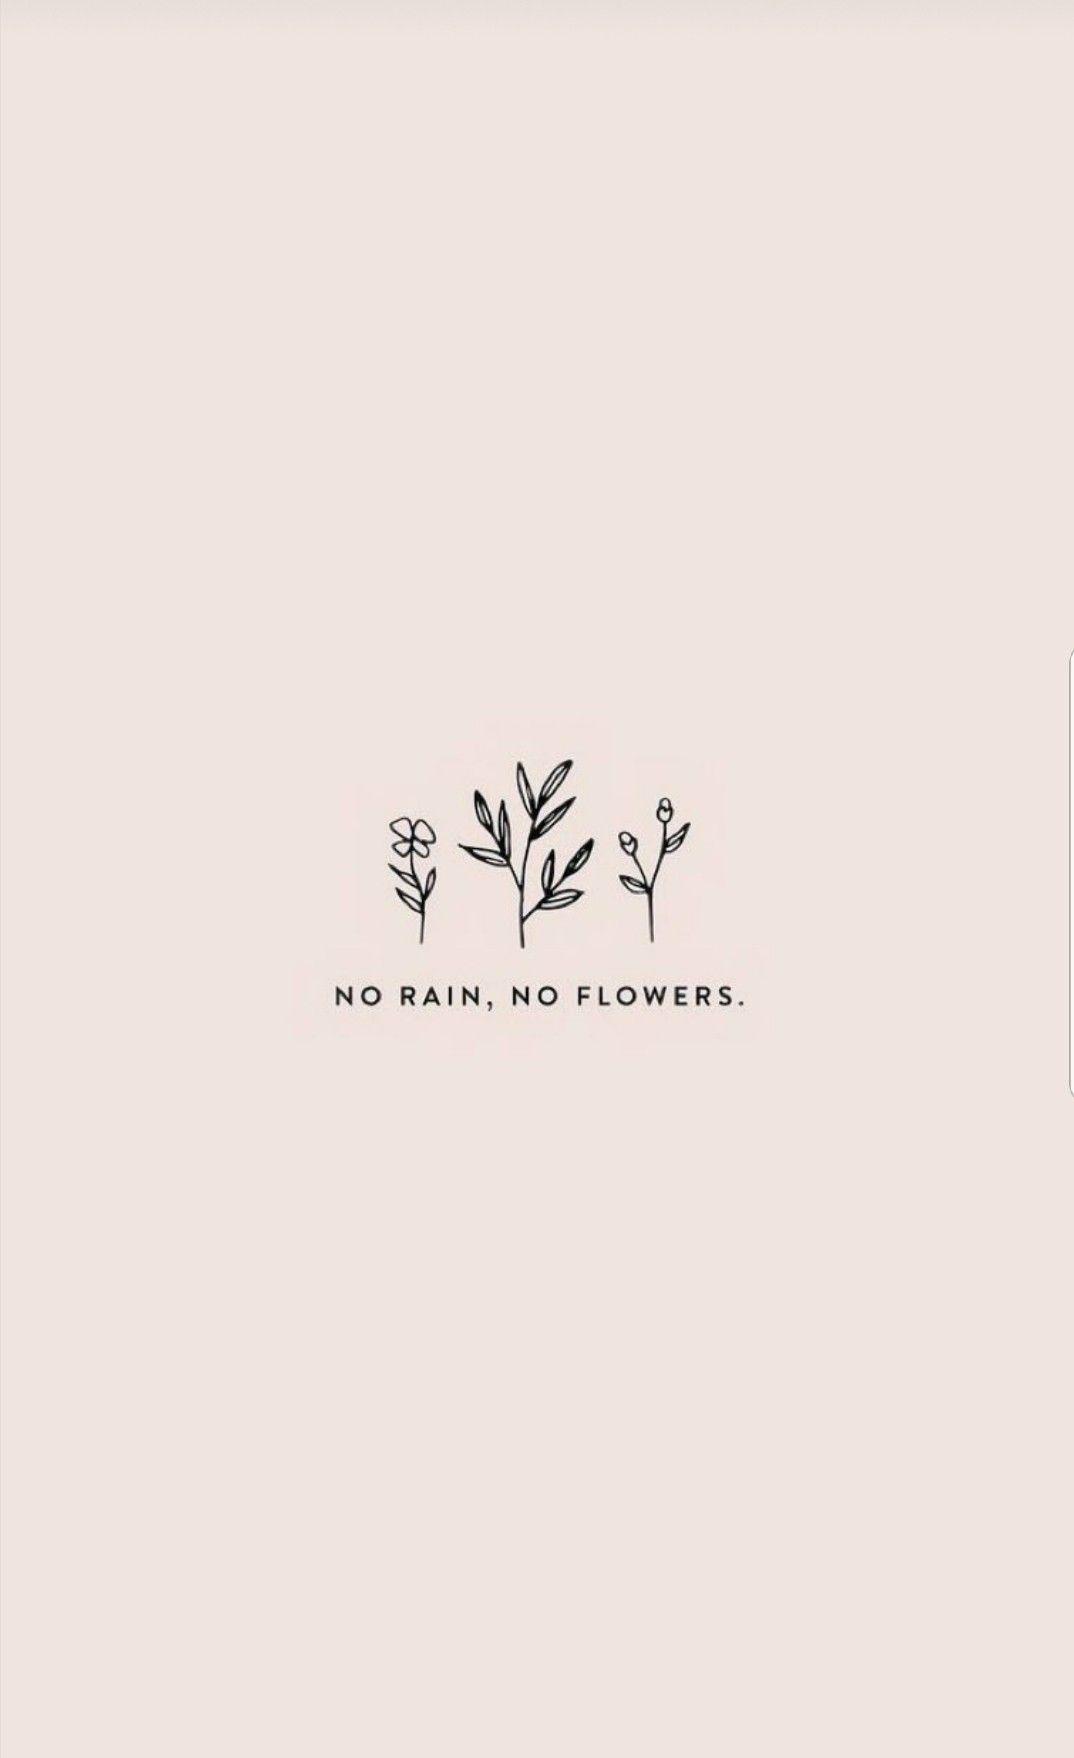 Aesthetic Minimalism Quote No Rain No Flowers Wallpaper Daily Quotes